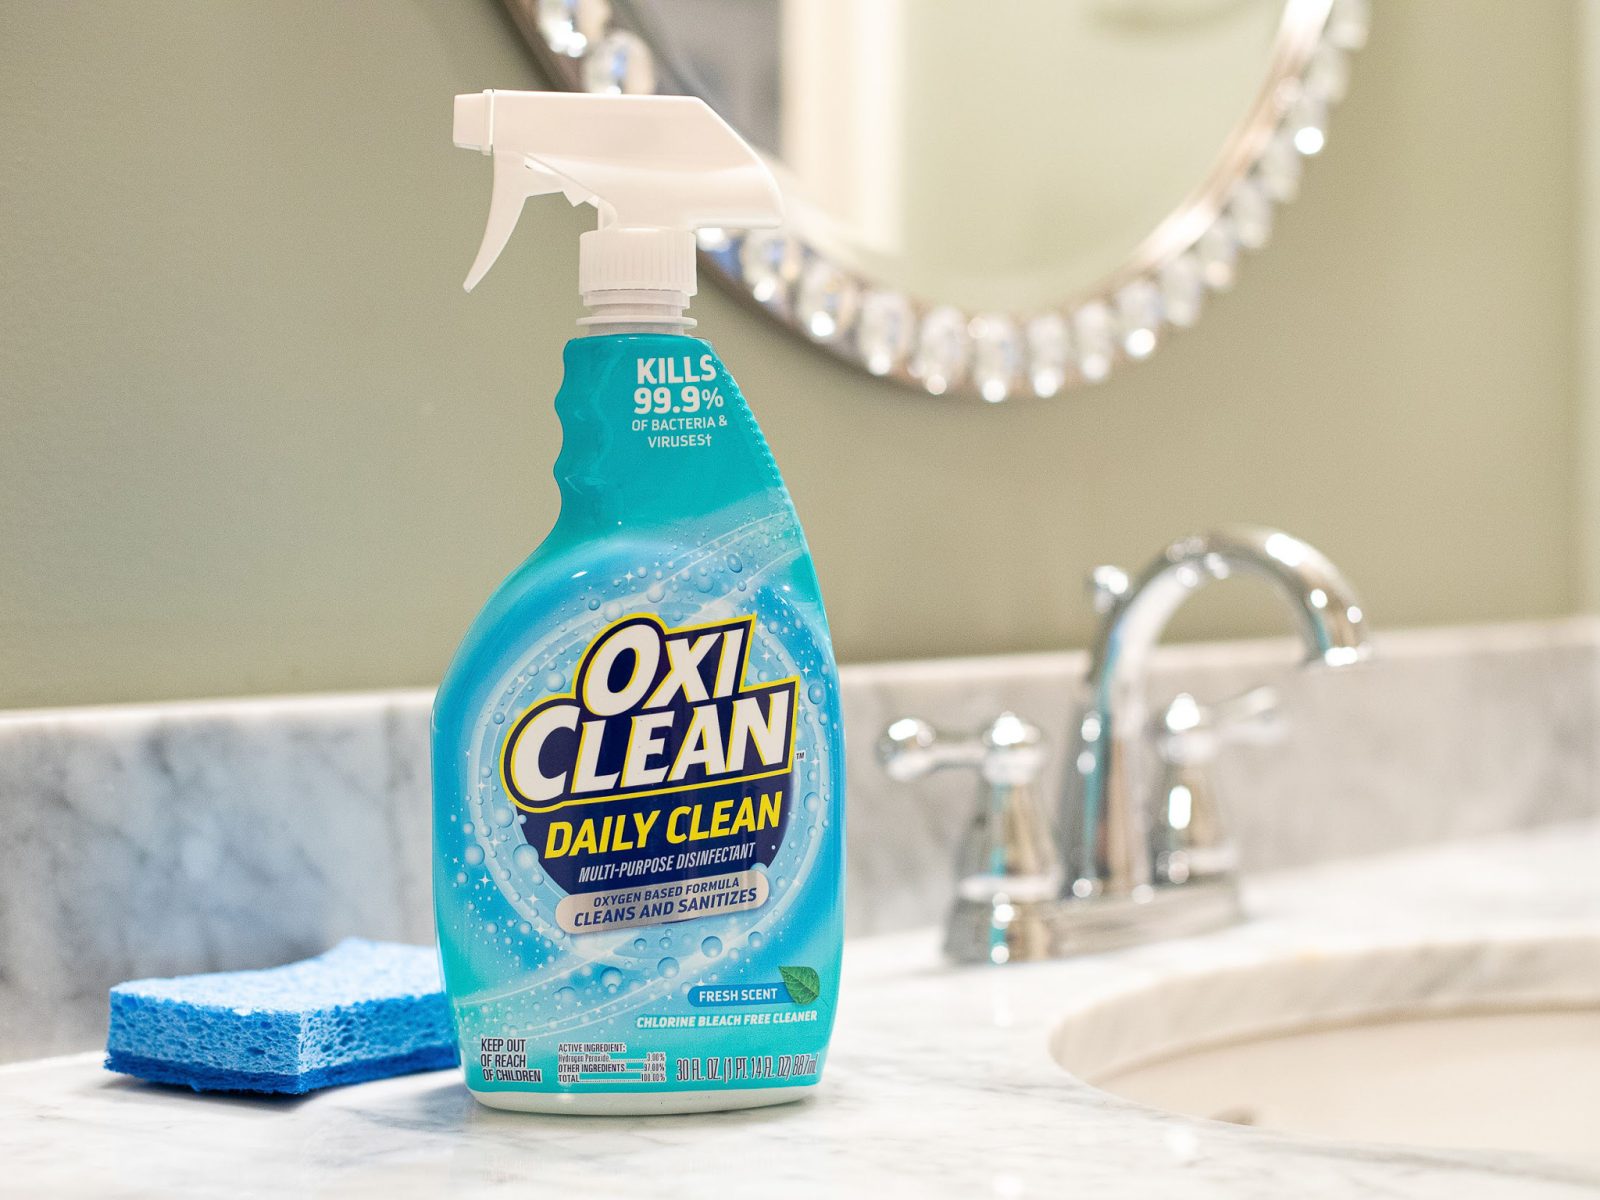 New OxiClean™ Multi-Purpose Disinfectant Cleaners Are Now Available At Publix – Clean & Disinfect Household Surfaces With The Power Of OxiClean™